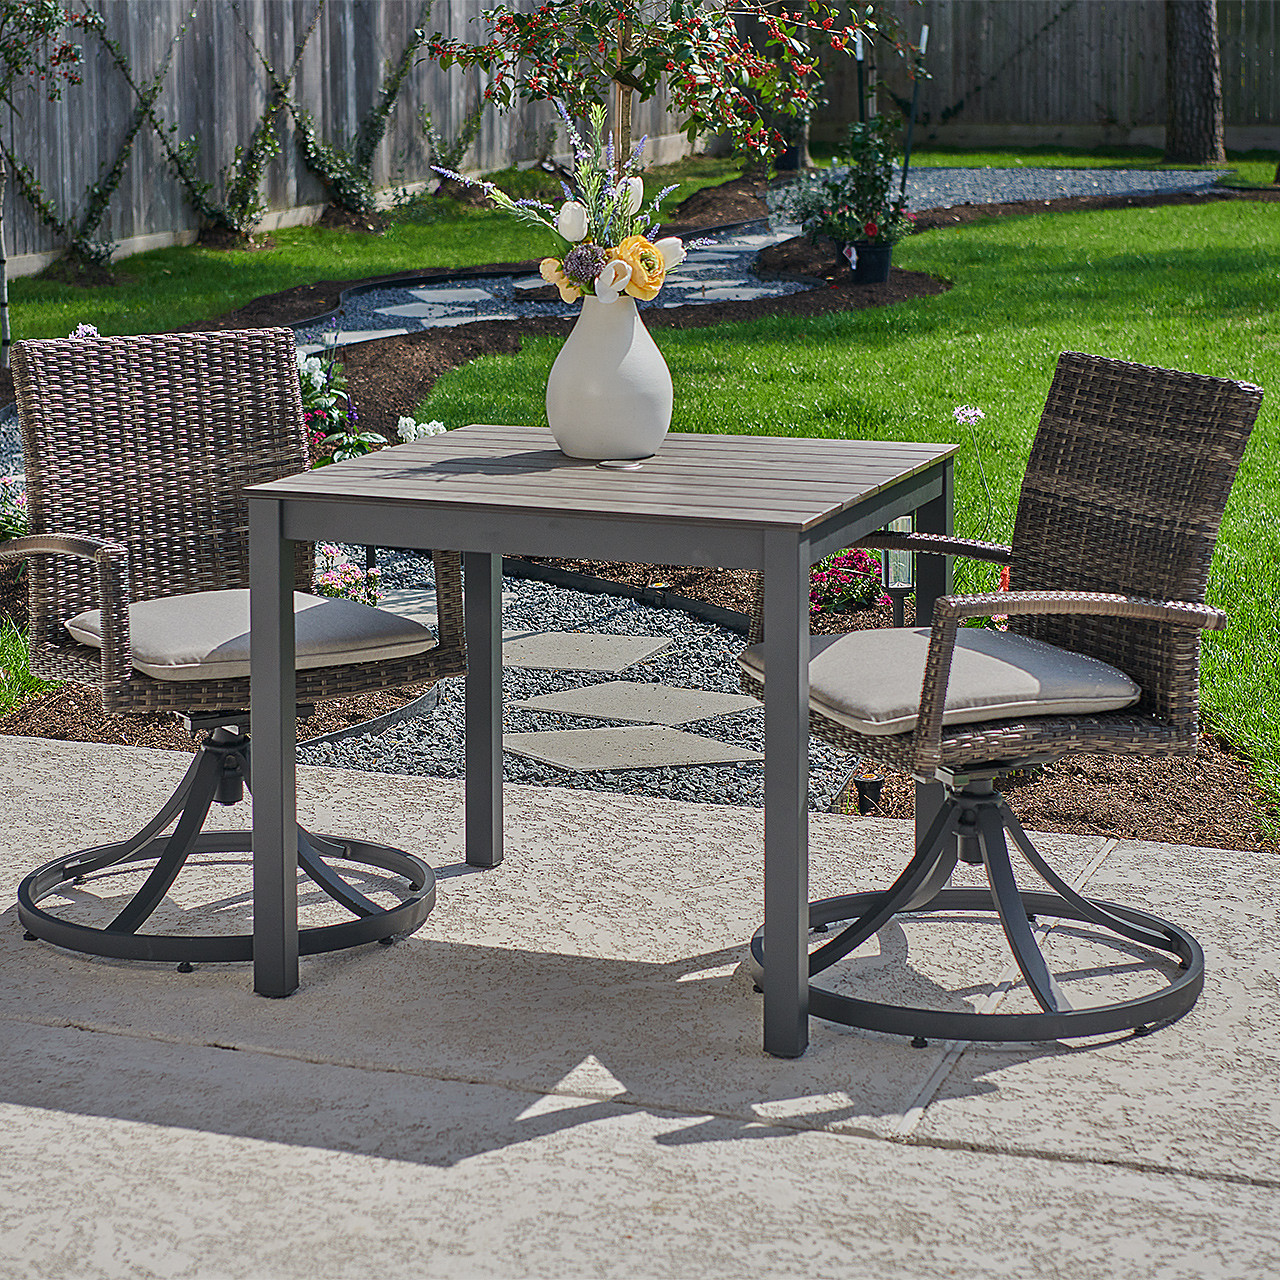 Contempo Husk Outdoor Wicker with Cushions 3 Piece Swivel Bistro Set + 33 in. Sq. Table